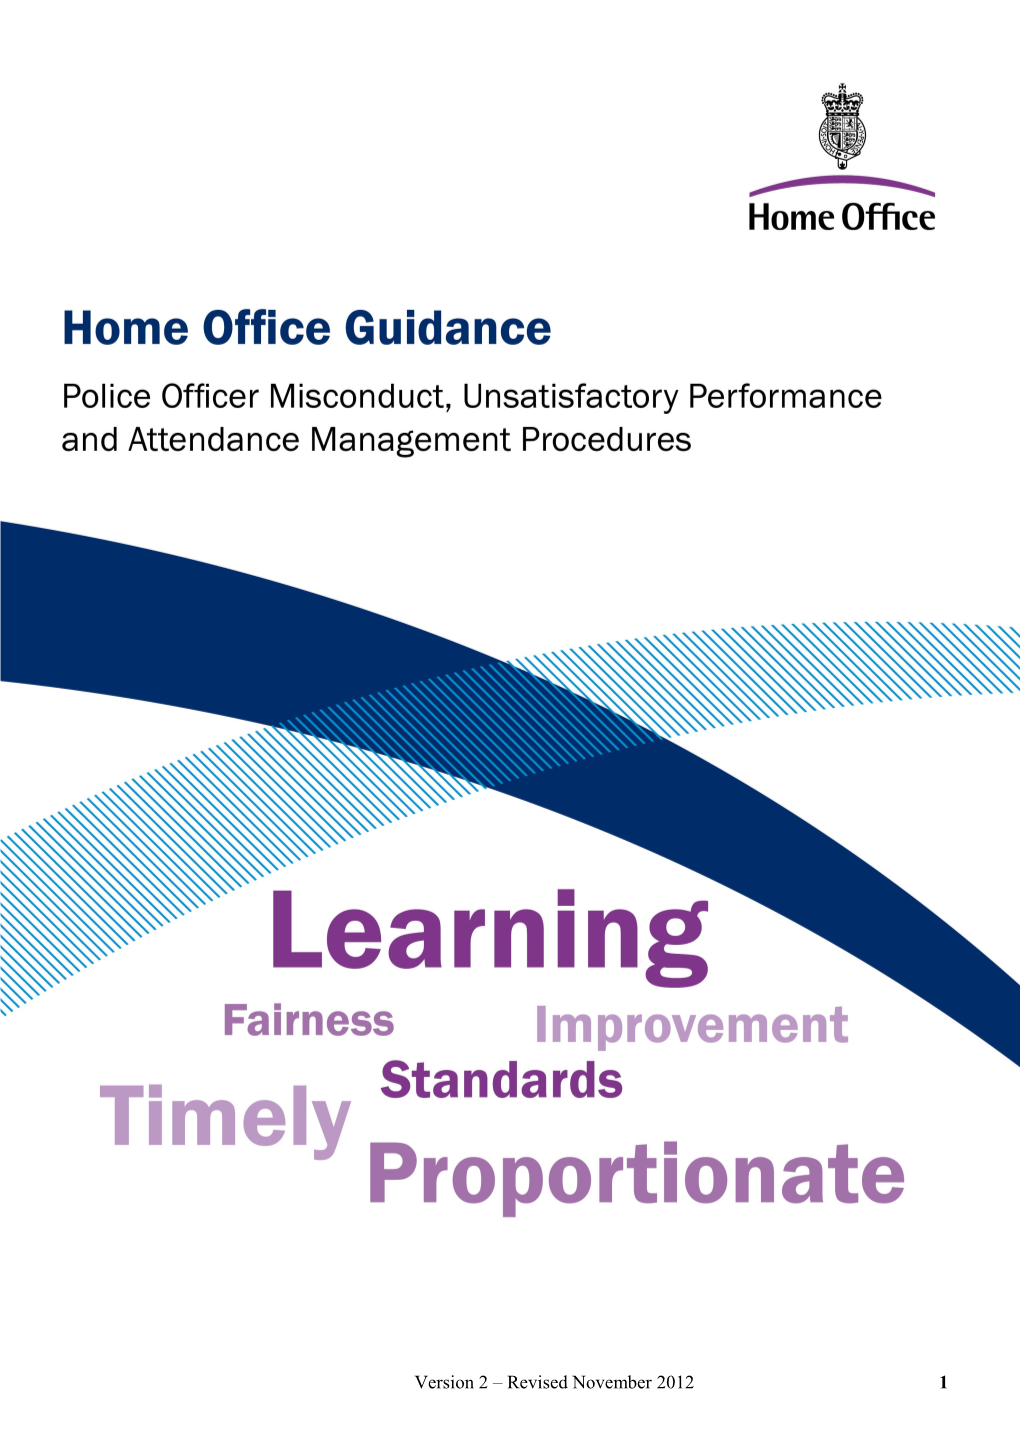 Chapter 1. Guidance on Standards of Professional Behaviour